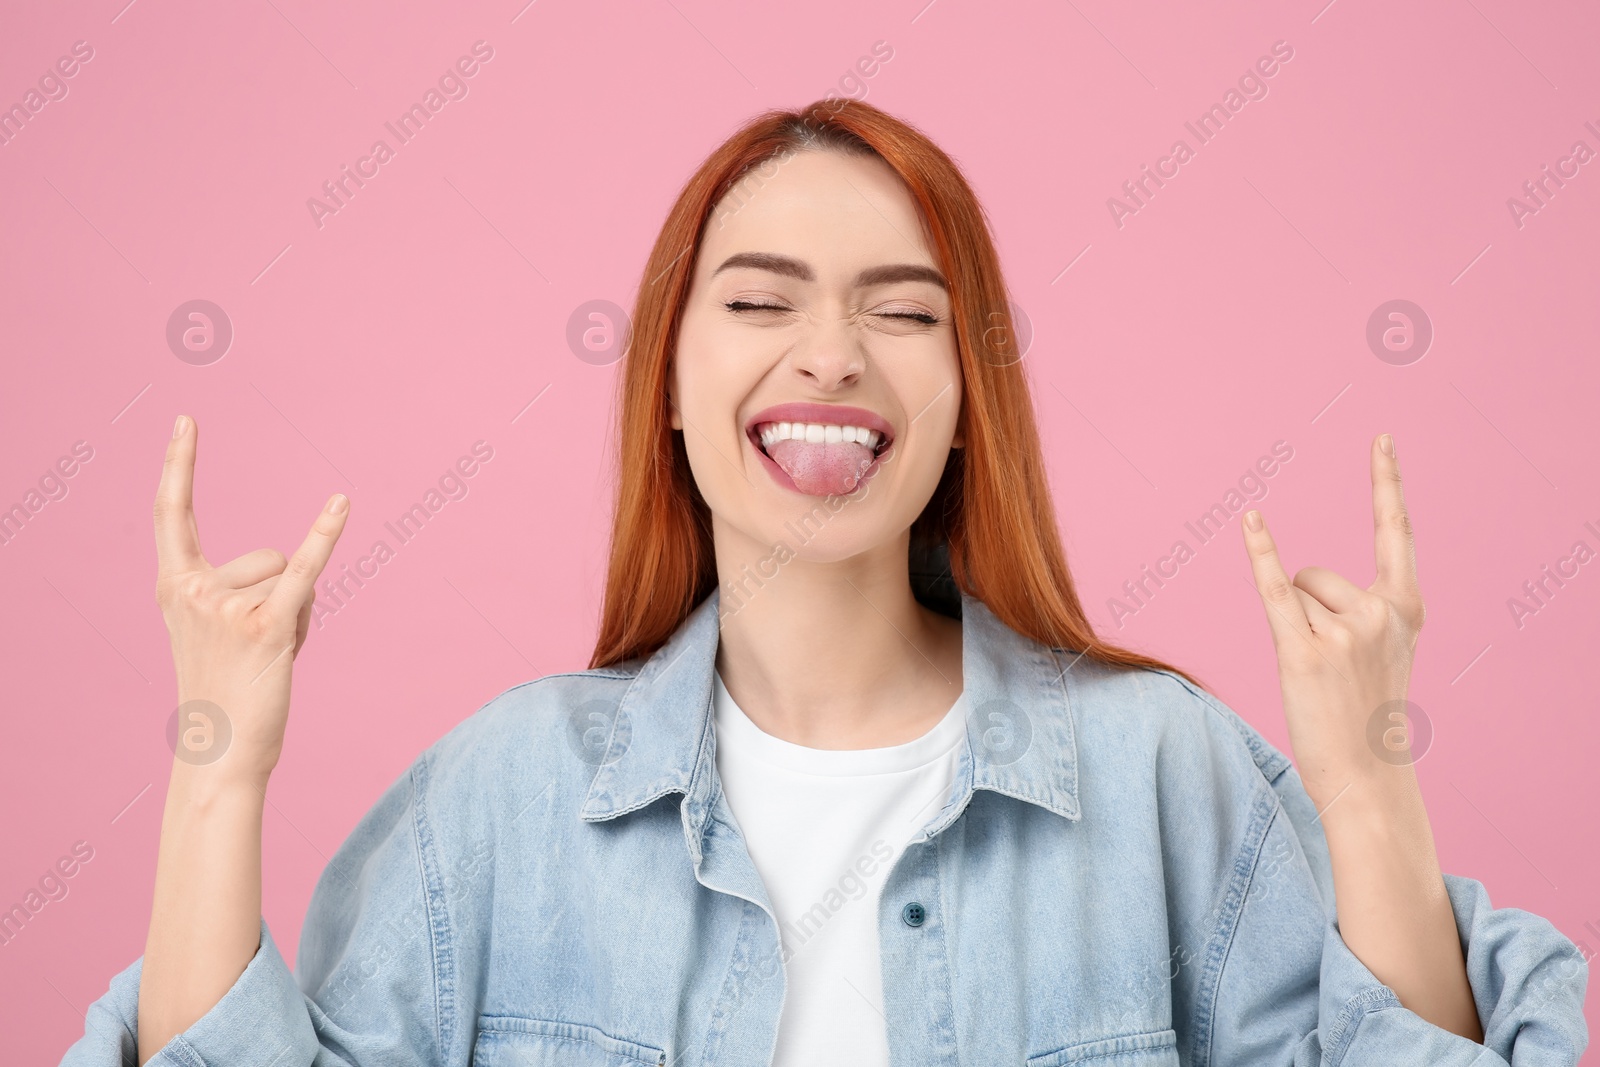 Photo of Happy woman showing her tongue and rock gesture on pink background